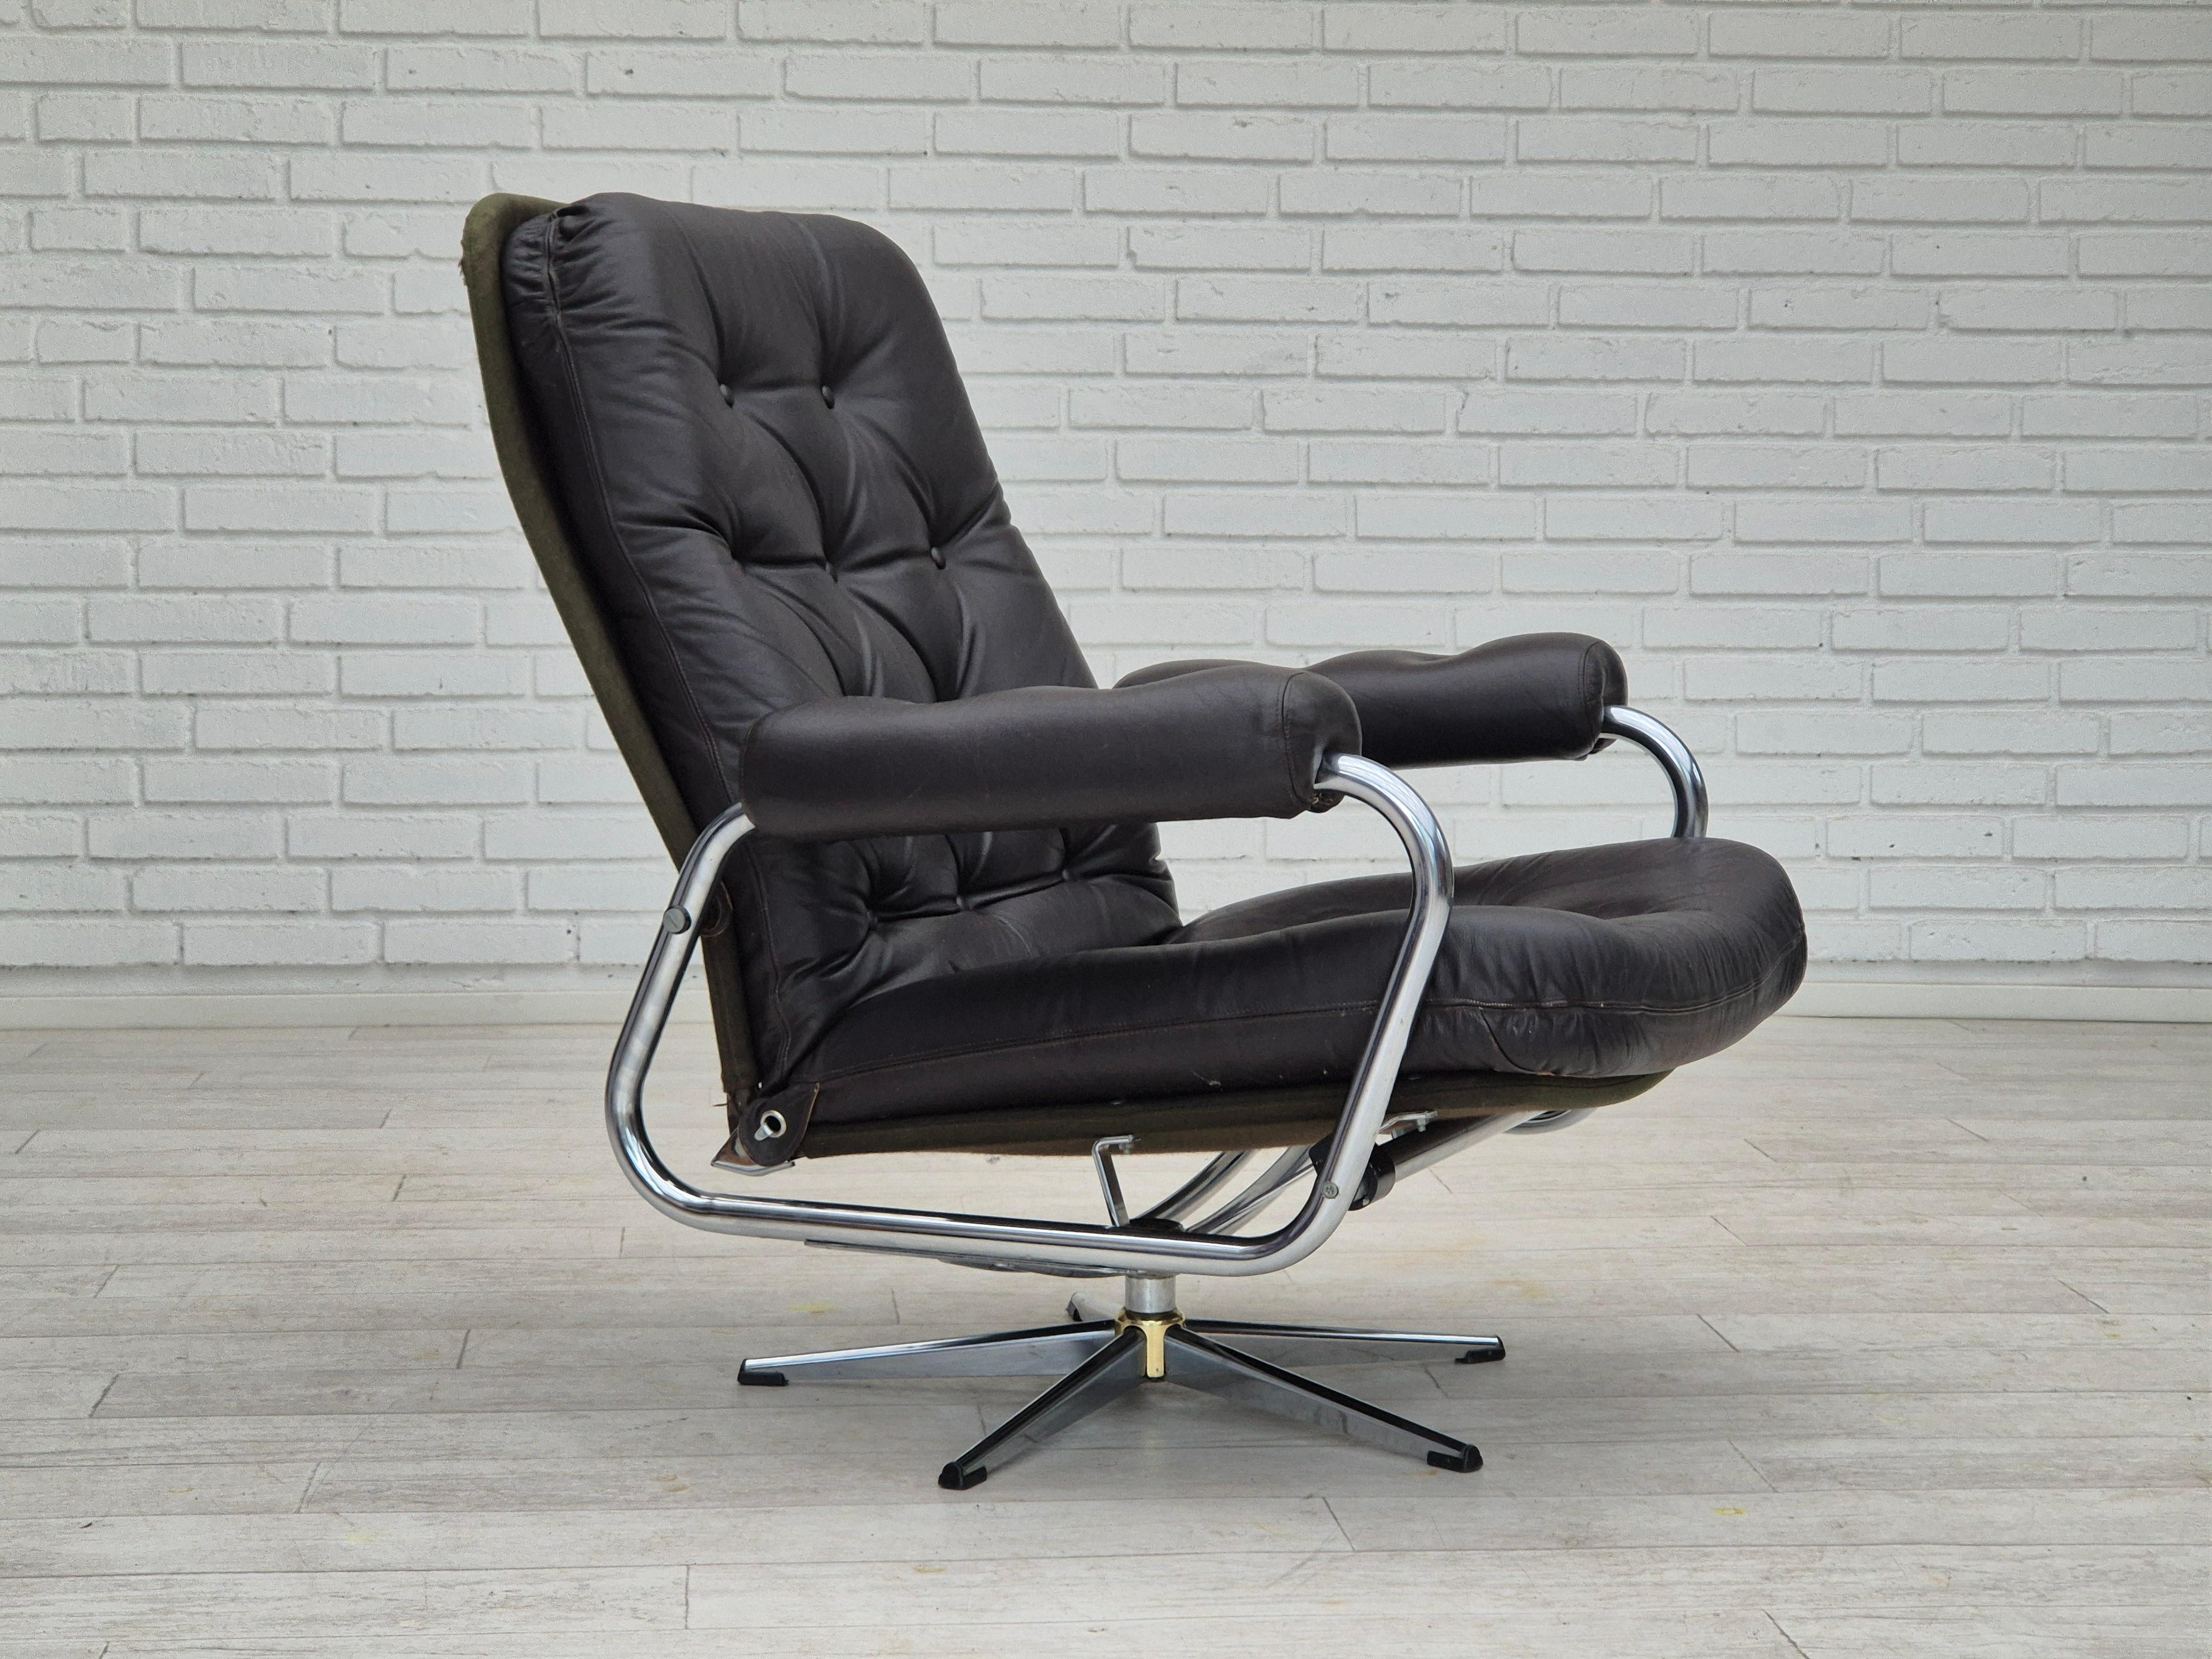 1970s, Danish swivel chair in original good condition: no smells and no stains. Adjustable seat with backrest. Brown leather, chrome steel, canvas. Manufactured by Danish furniture maker in about 1970-75.